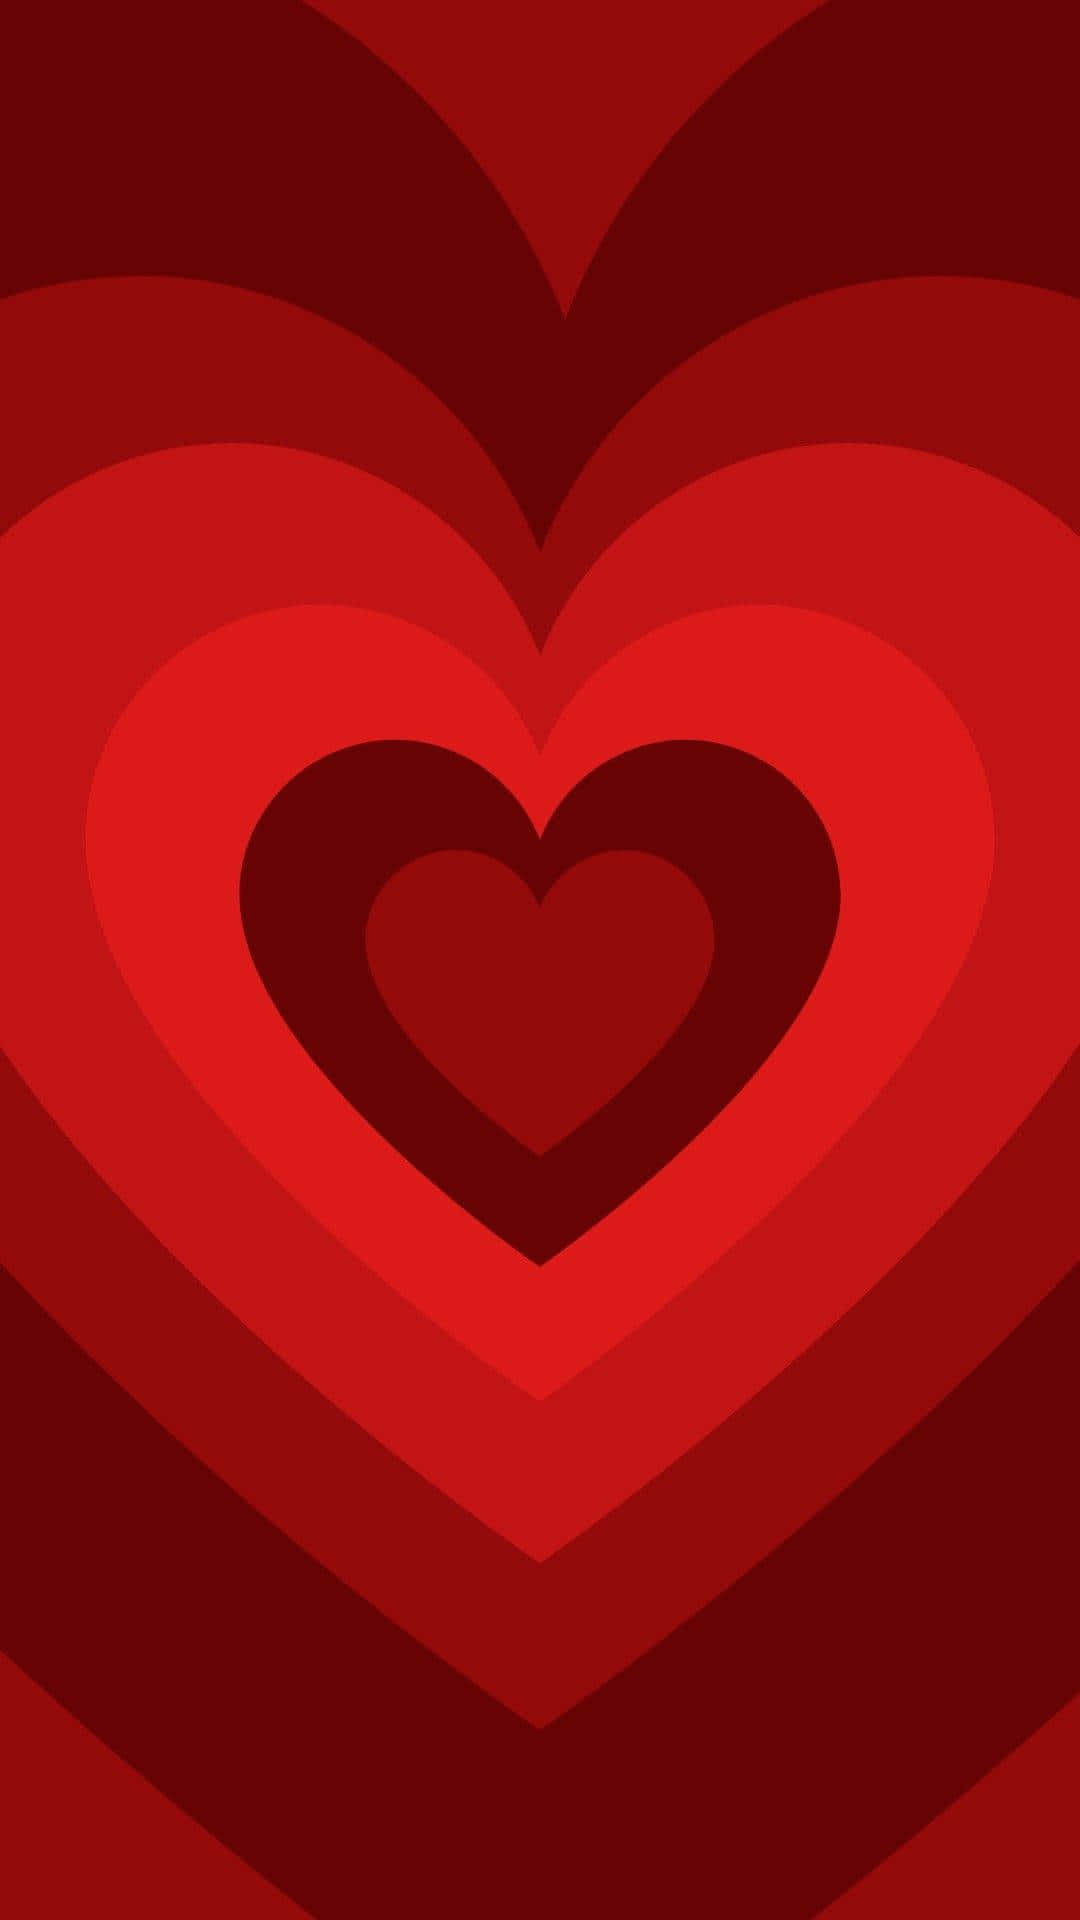 Discover 54+ red heart aesthetic wallpaper best - in.cdgdbentre